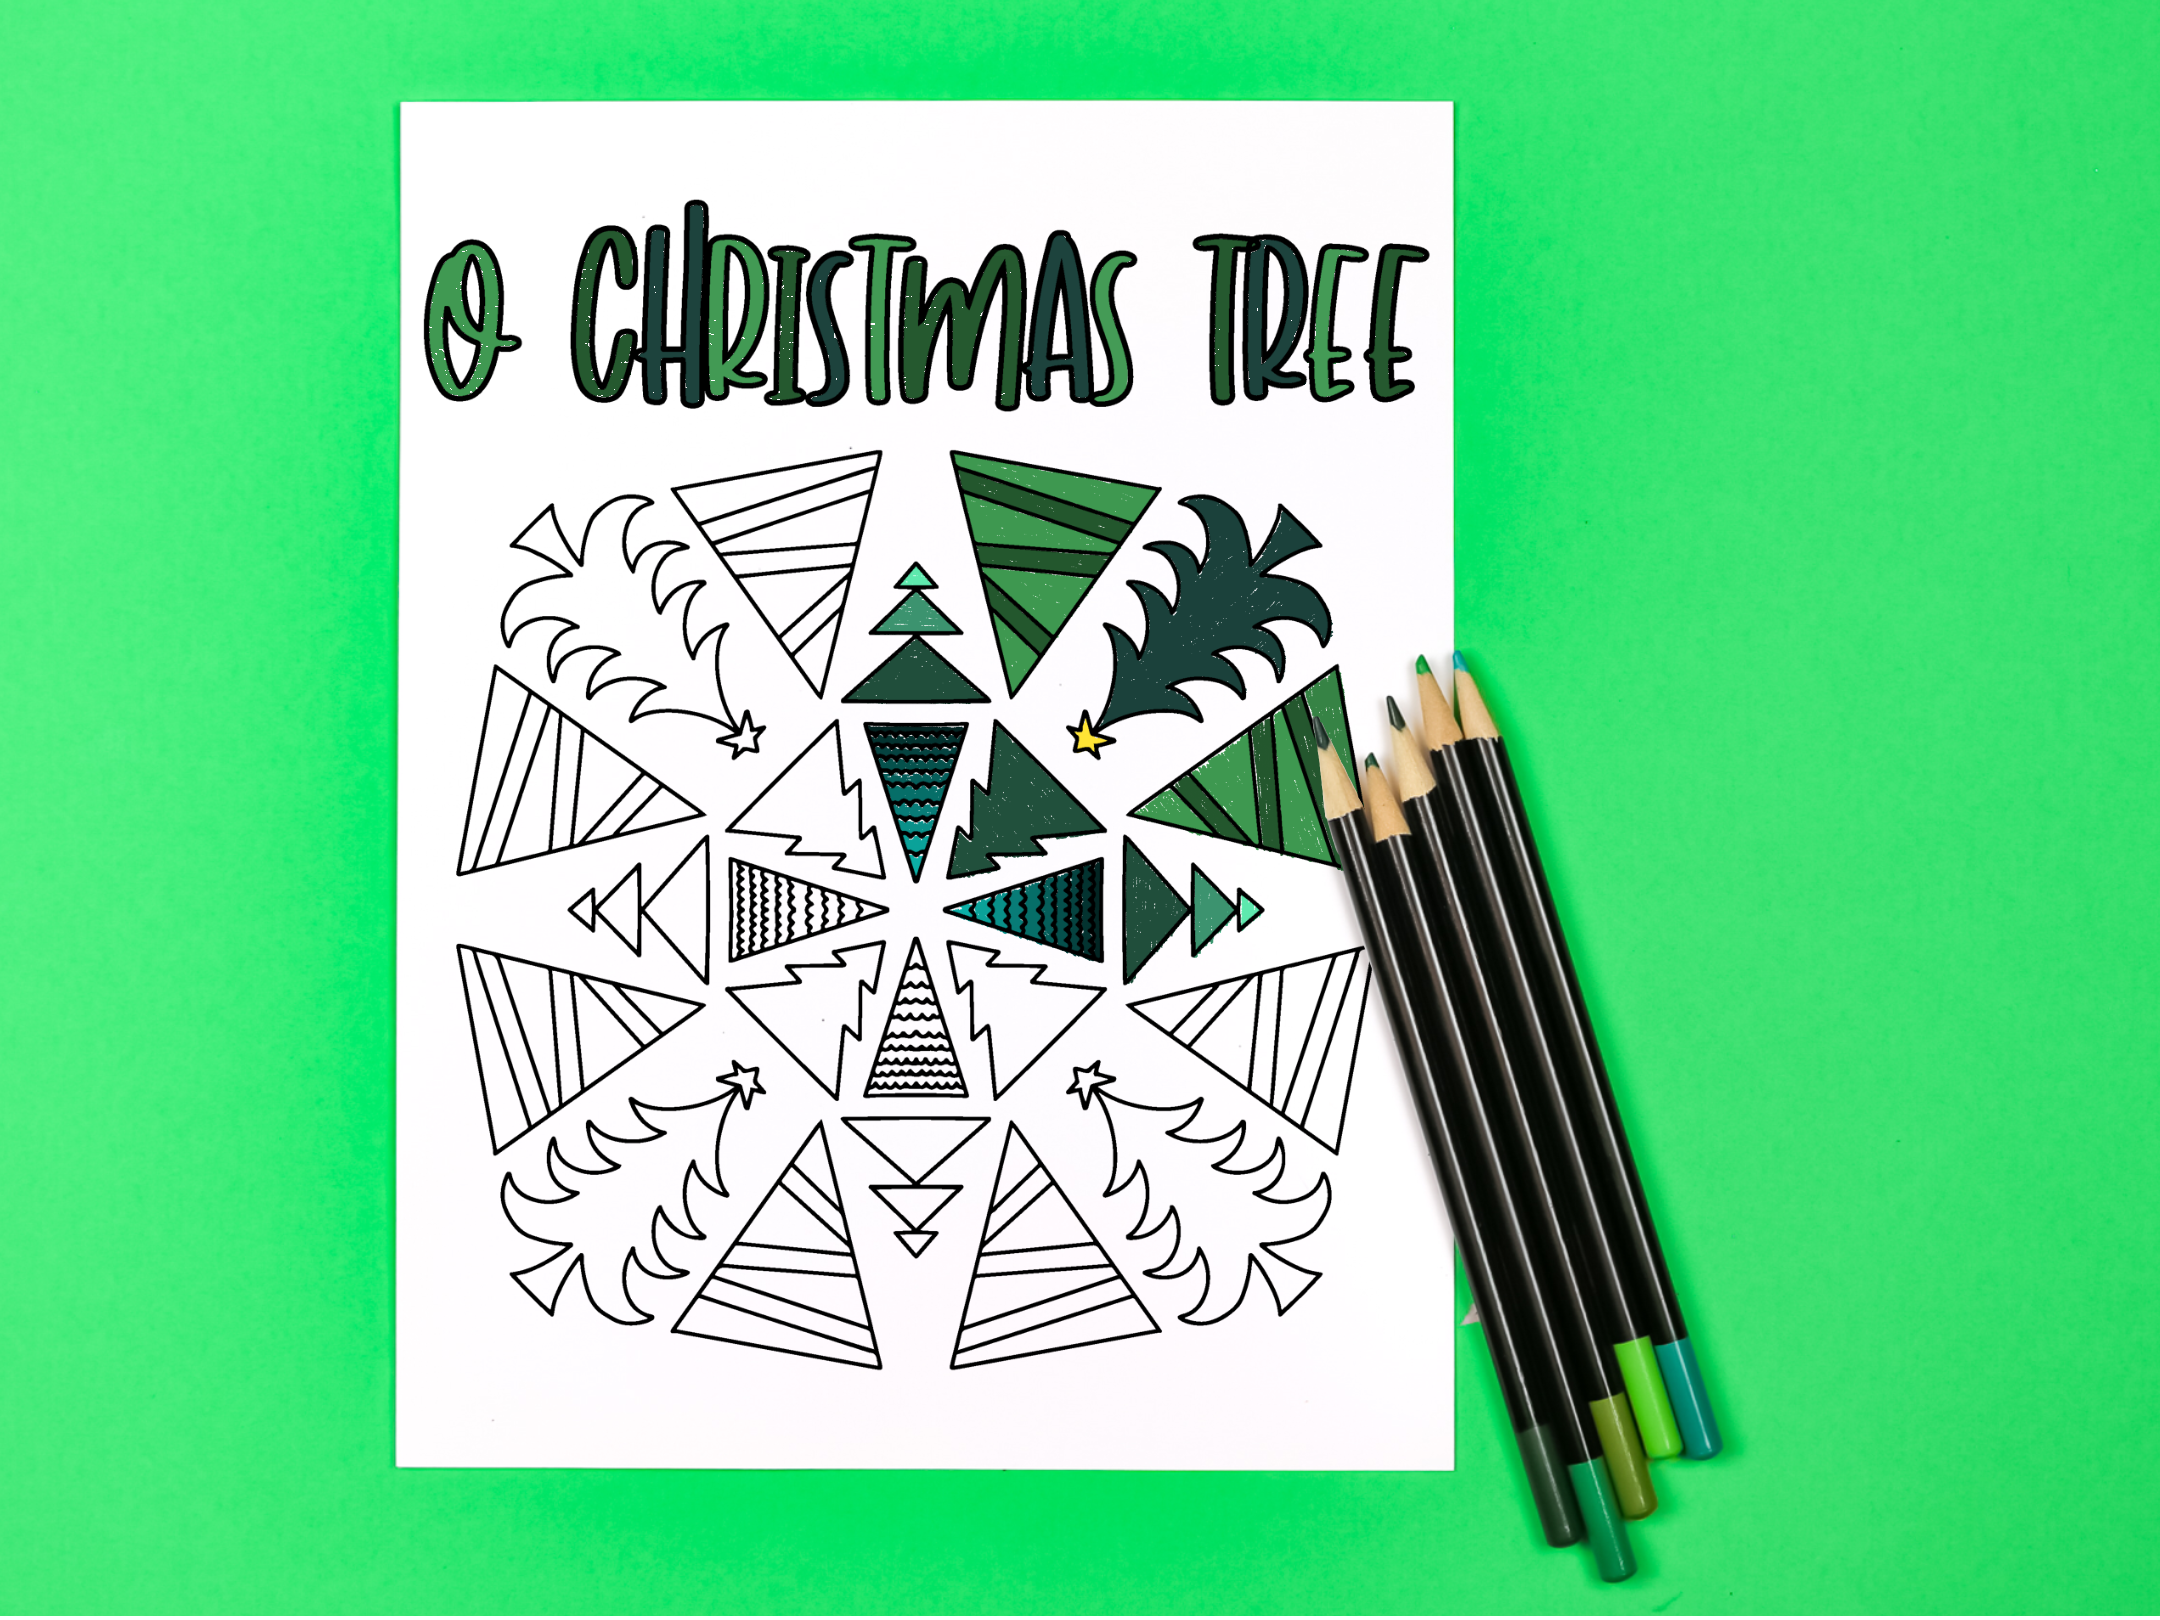 O Christmas Tree coloring page with colored pencils on a green background